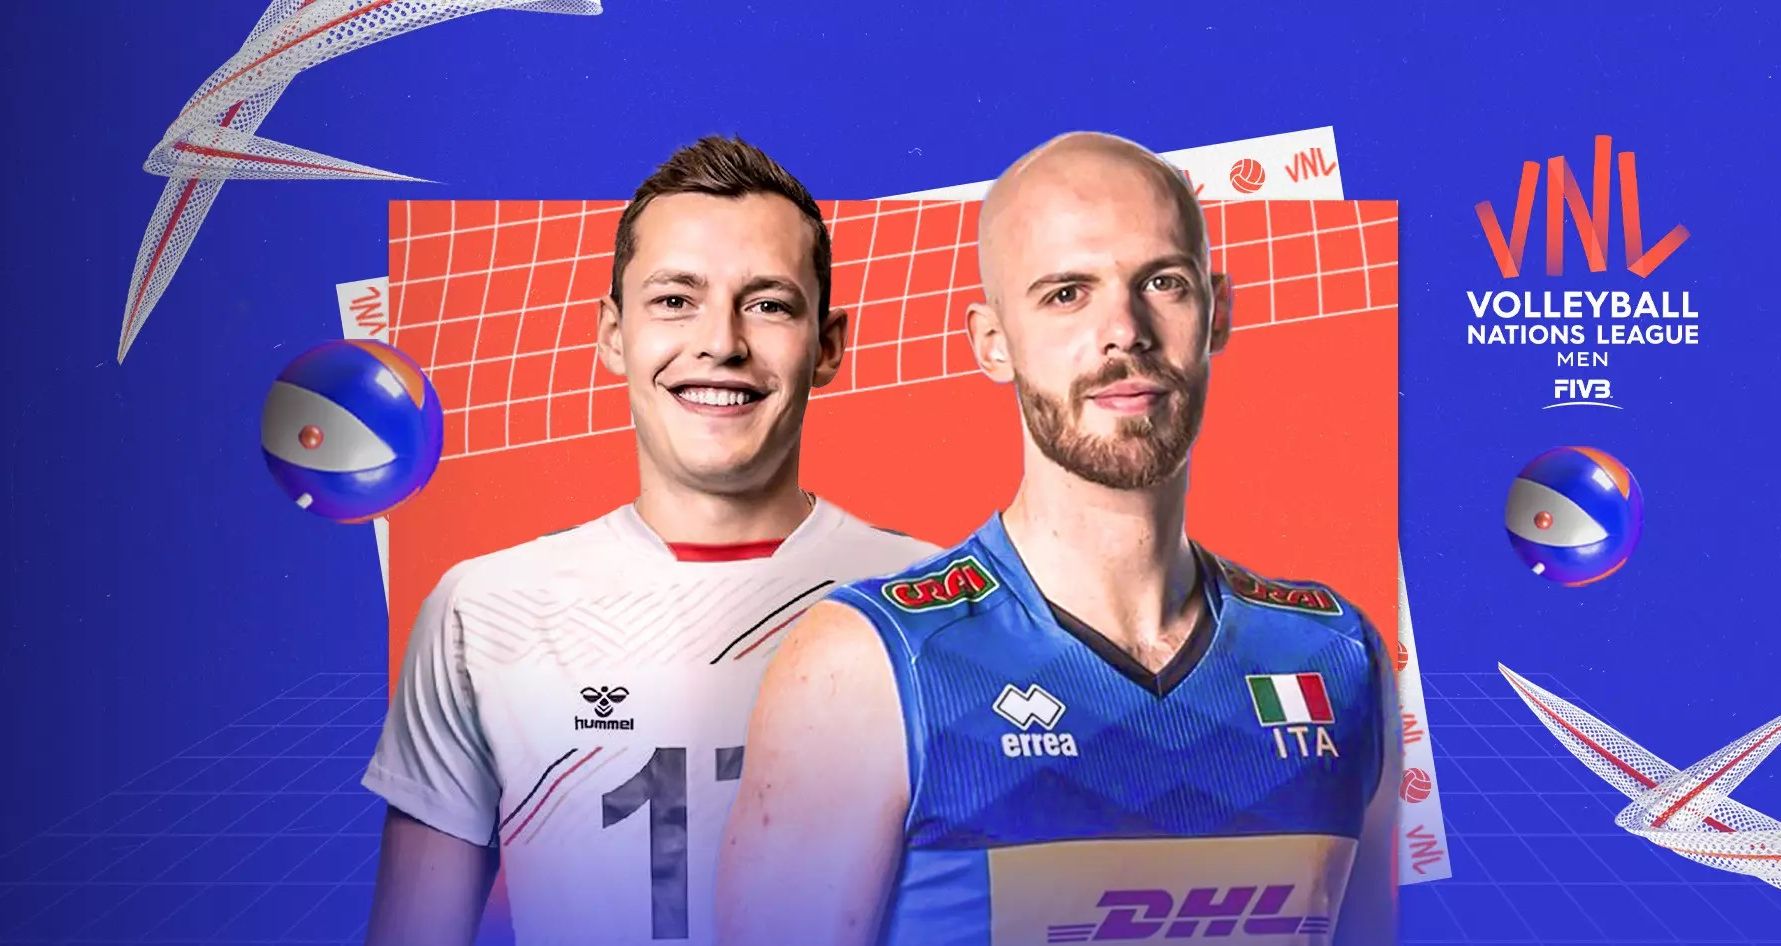 LINK LIVE STREAMING Men's Volleyball Nations League 2022 Duel Derby